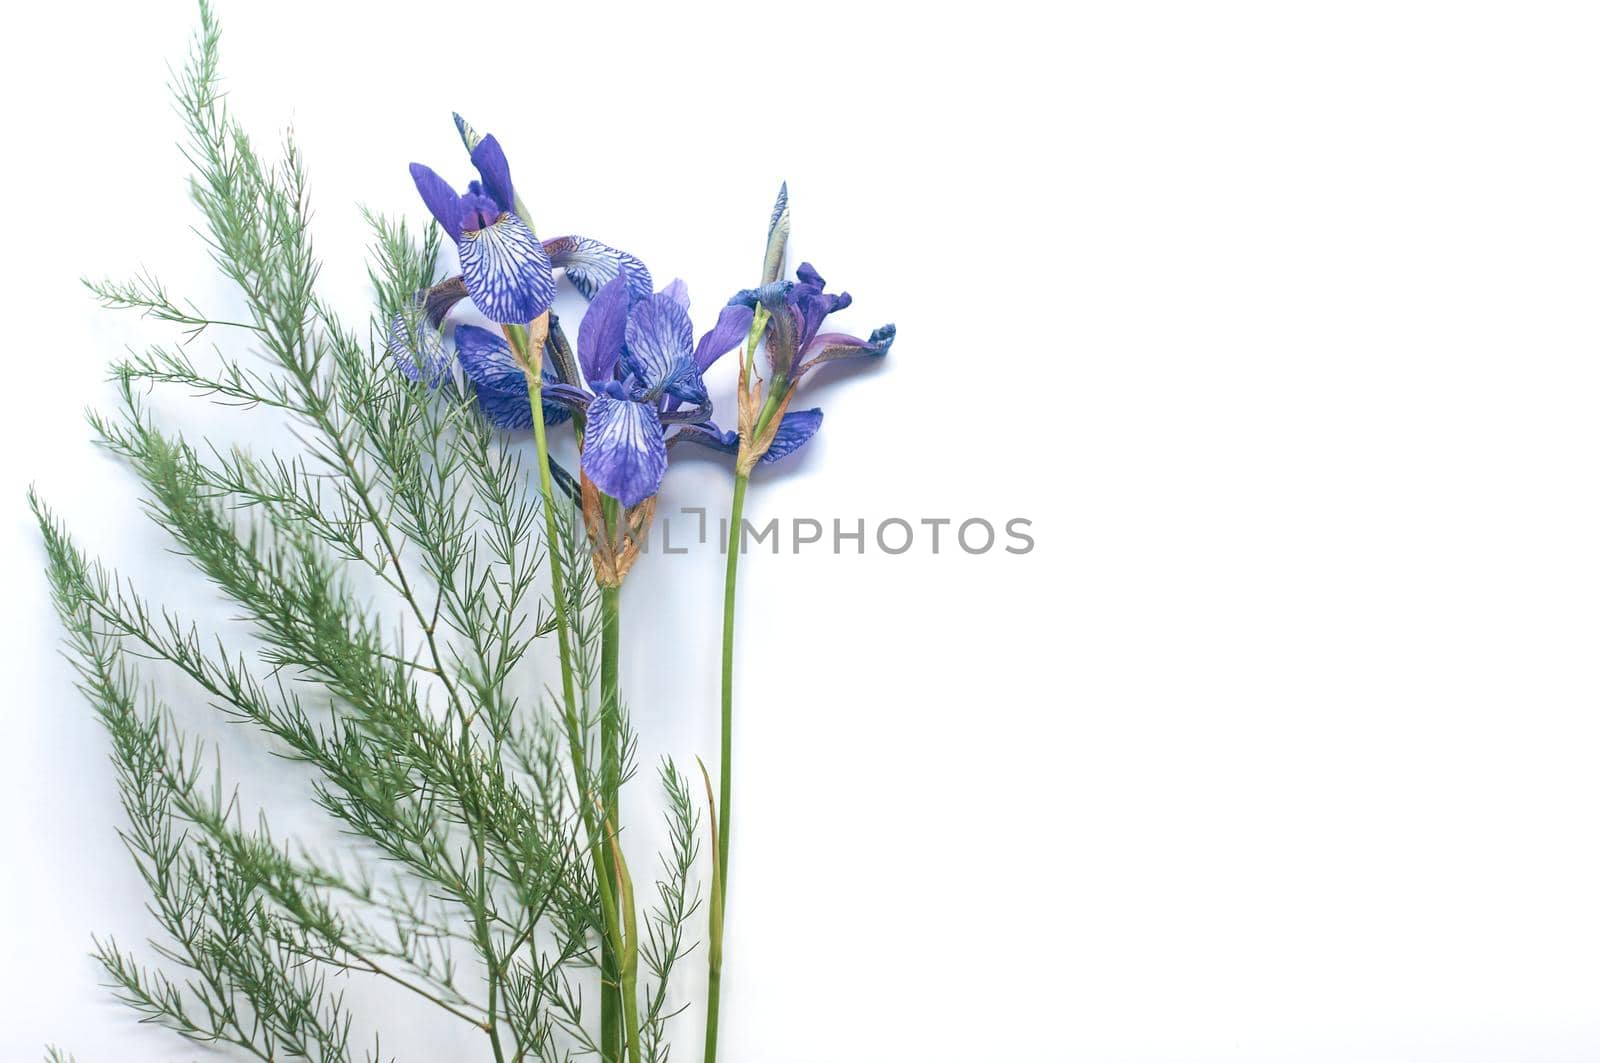 bouquet of wild purple iris flowers on a white paper background